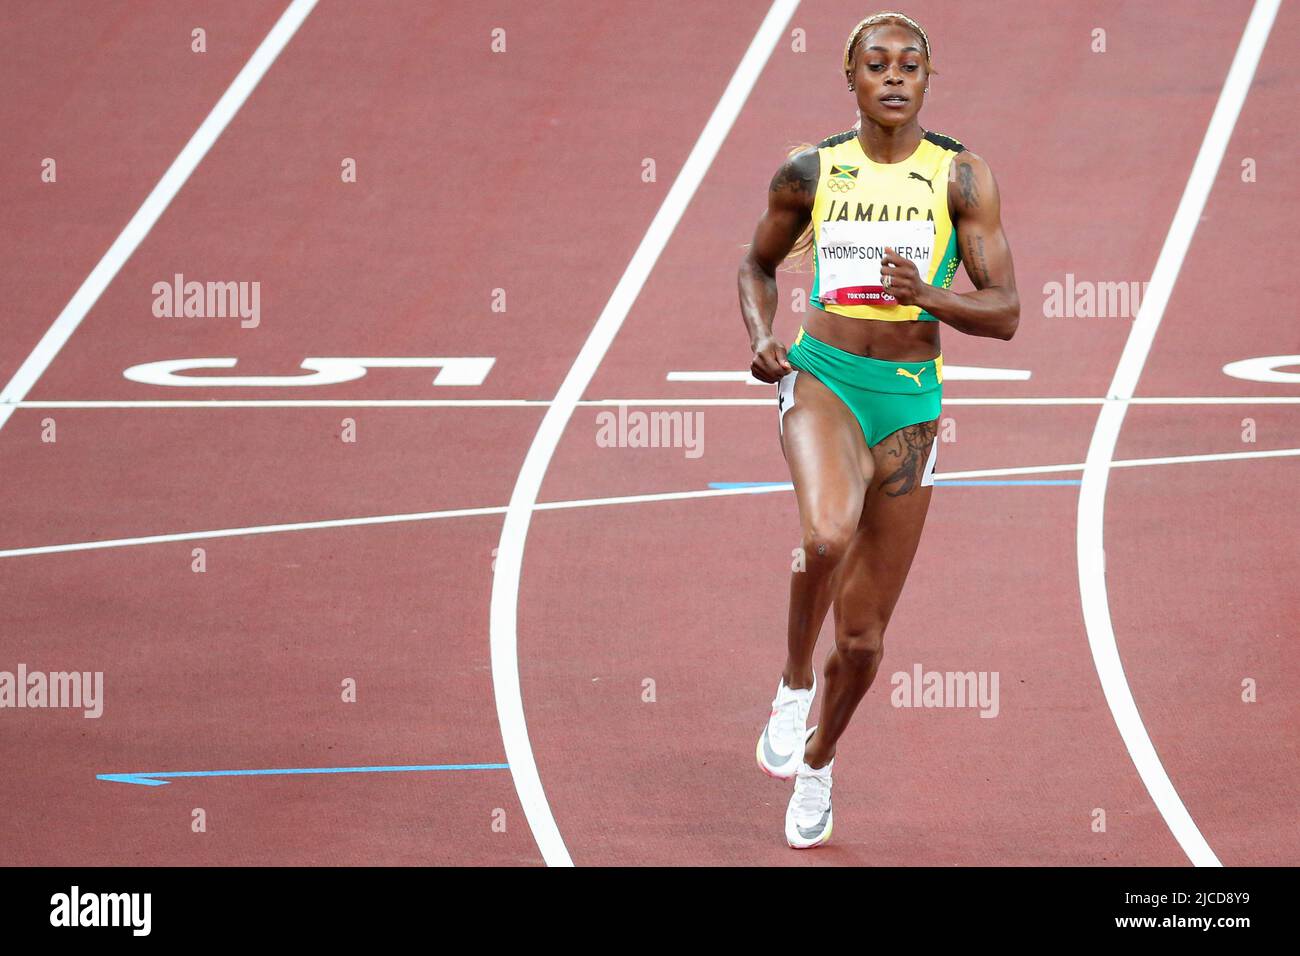 JULY 31st, 2021 - TOKYO, JAPAN: Elaine Thompson-Herah of Jamaica in action during the Women's 100m Semi-Finals at the Tokyo 2020 Olympic Games (Photo: Stock Photo